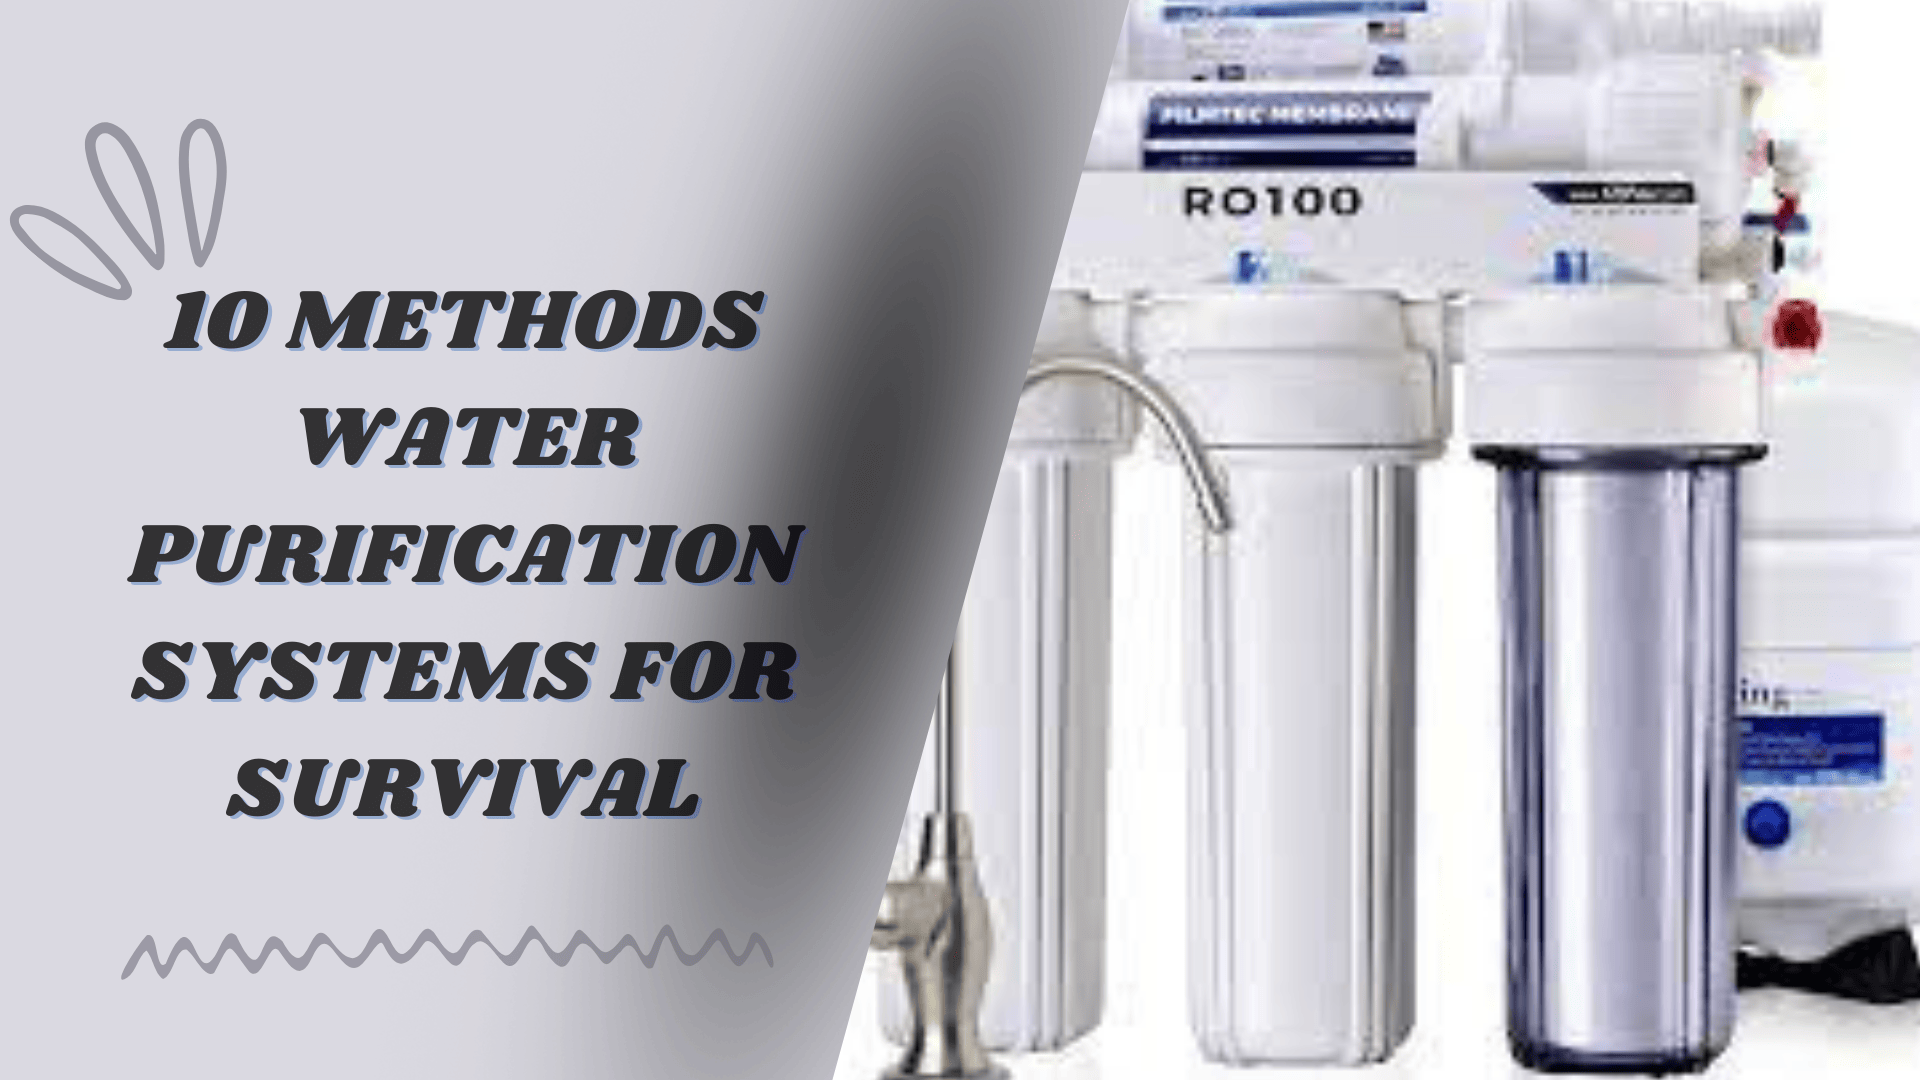 10 Methods Water Purification Systems for Survival